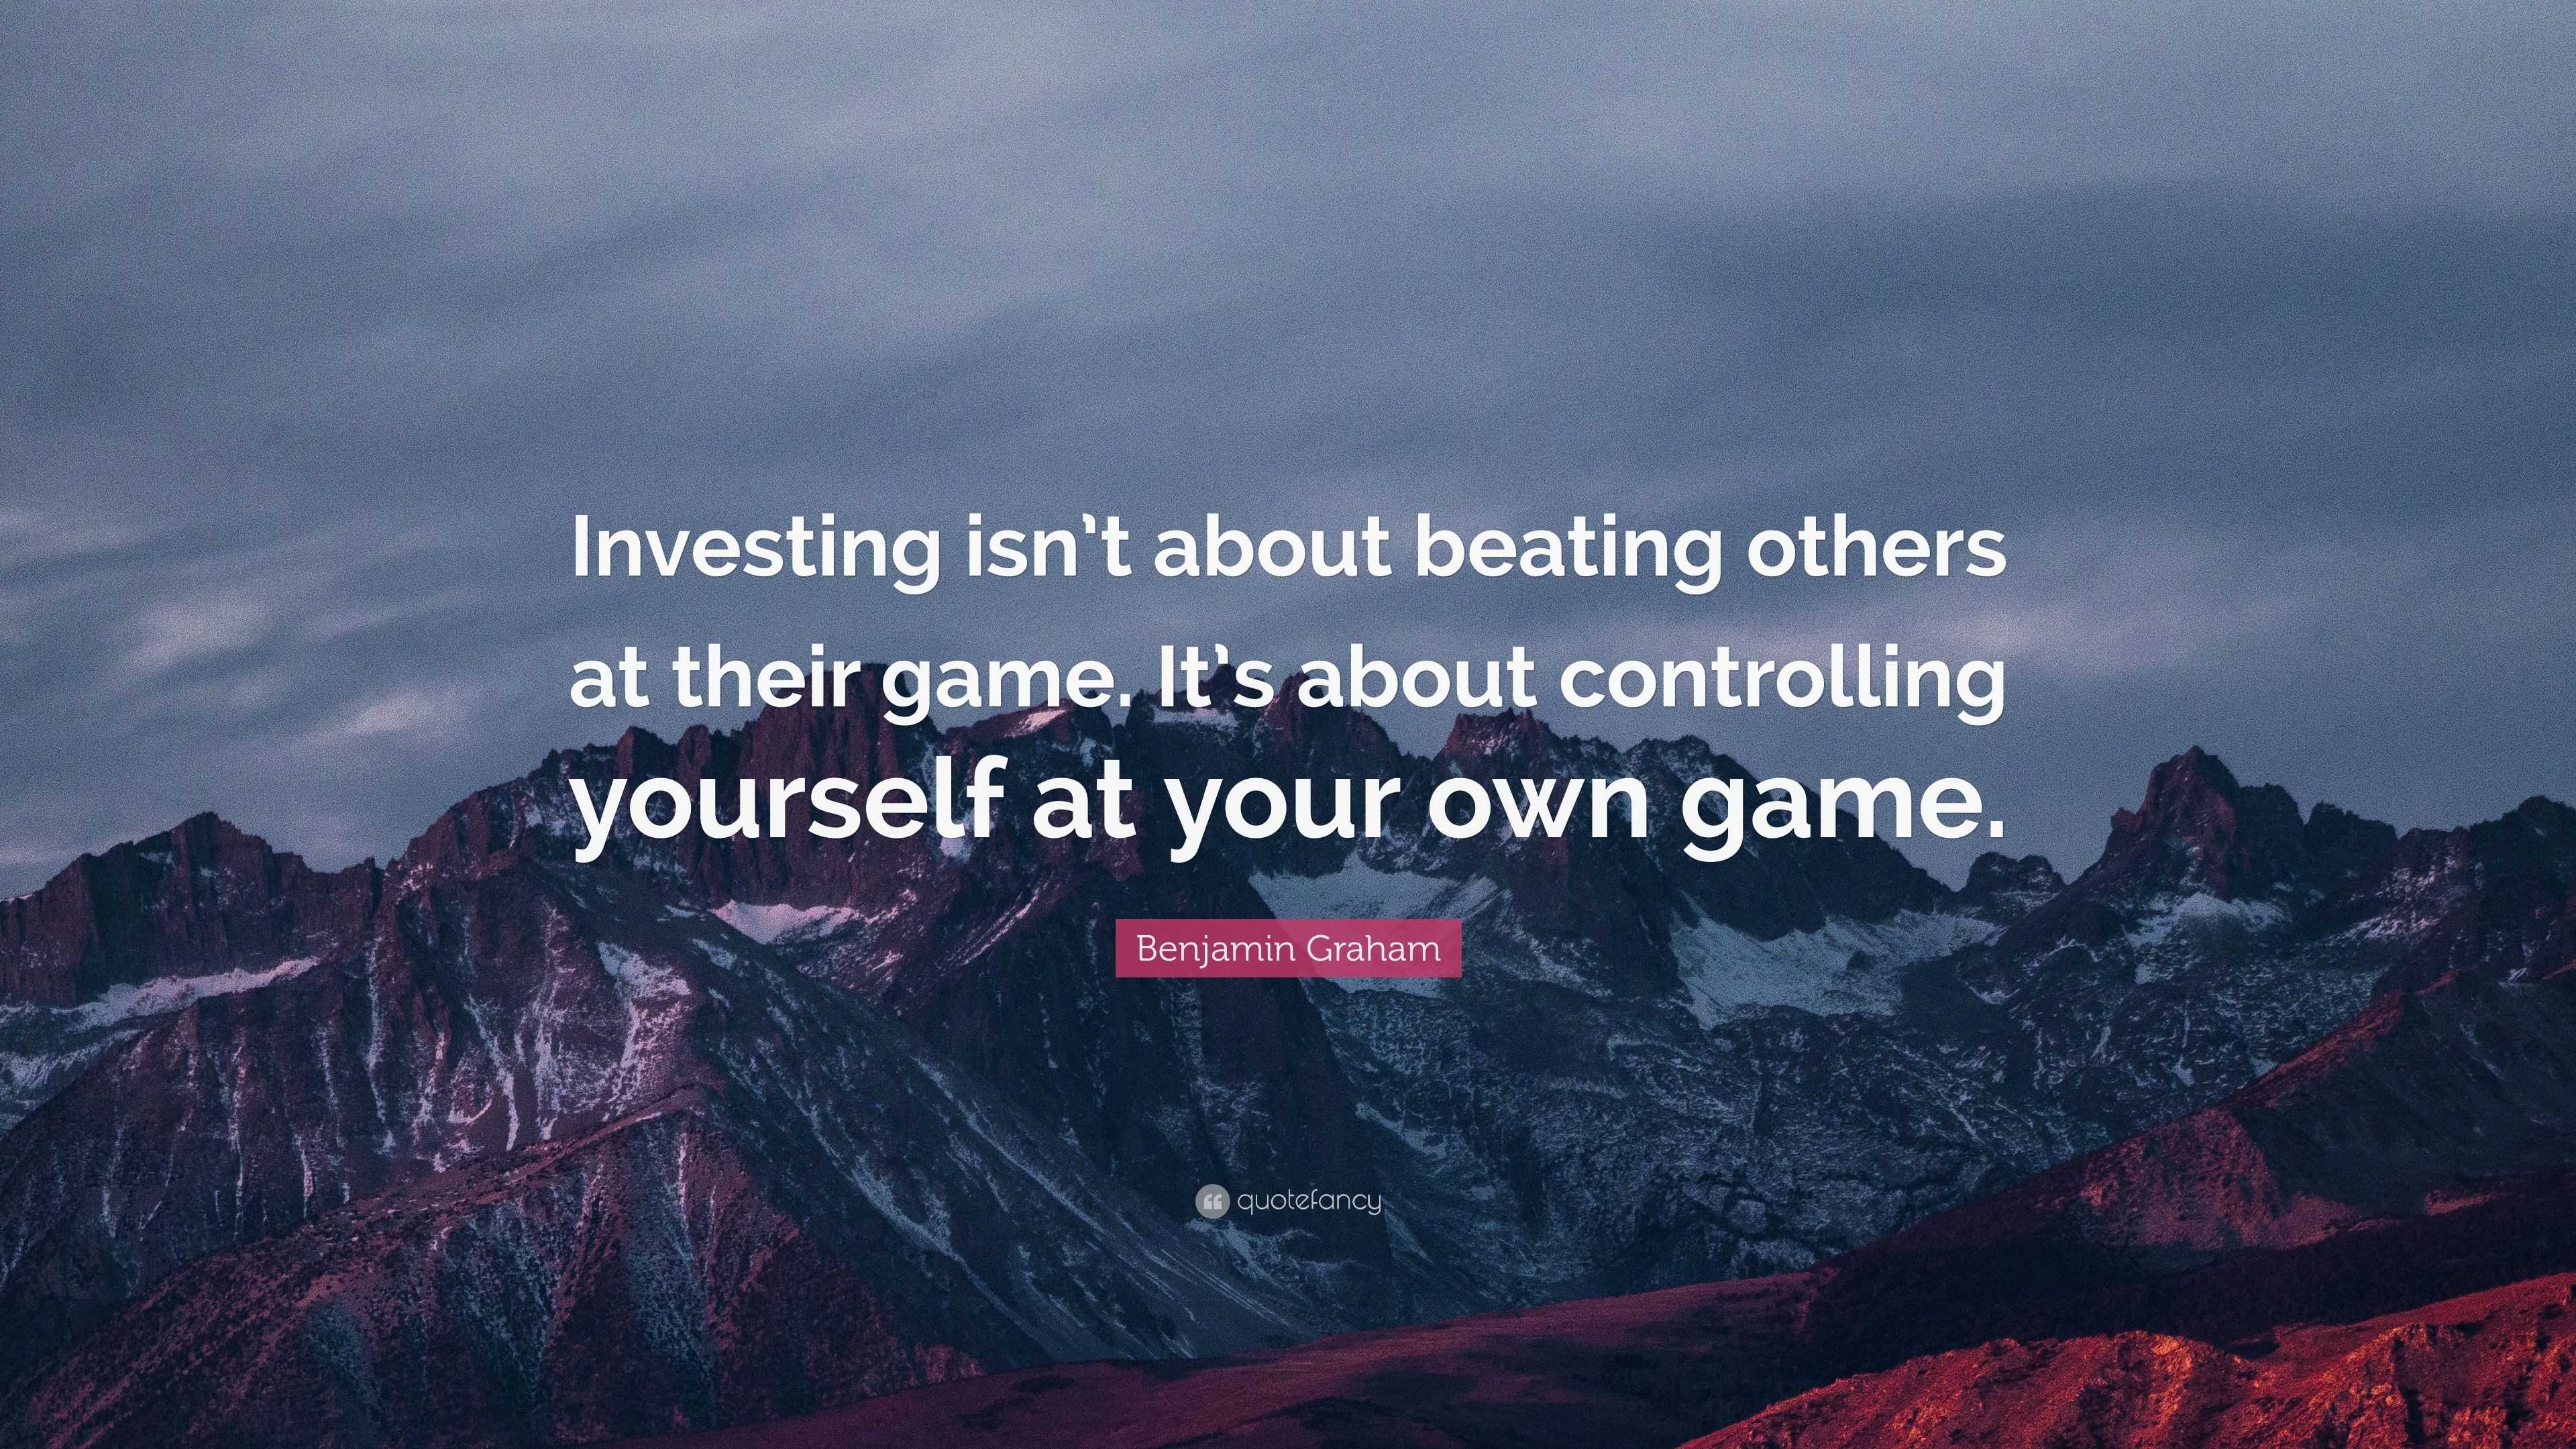 Benjamin Graham Quote: “Investing isn’t about beating others at their ...